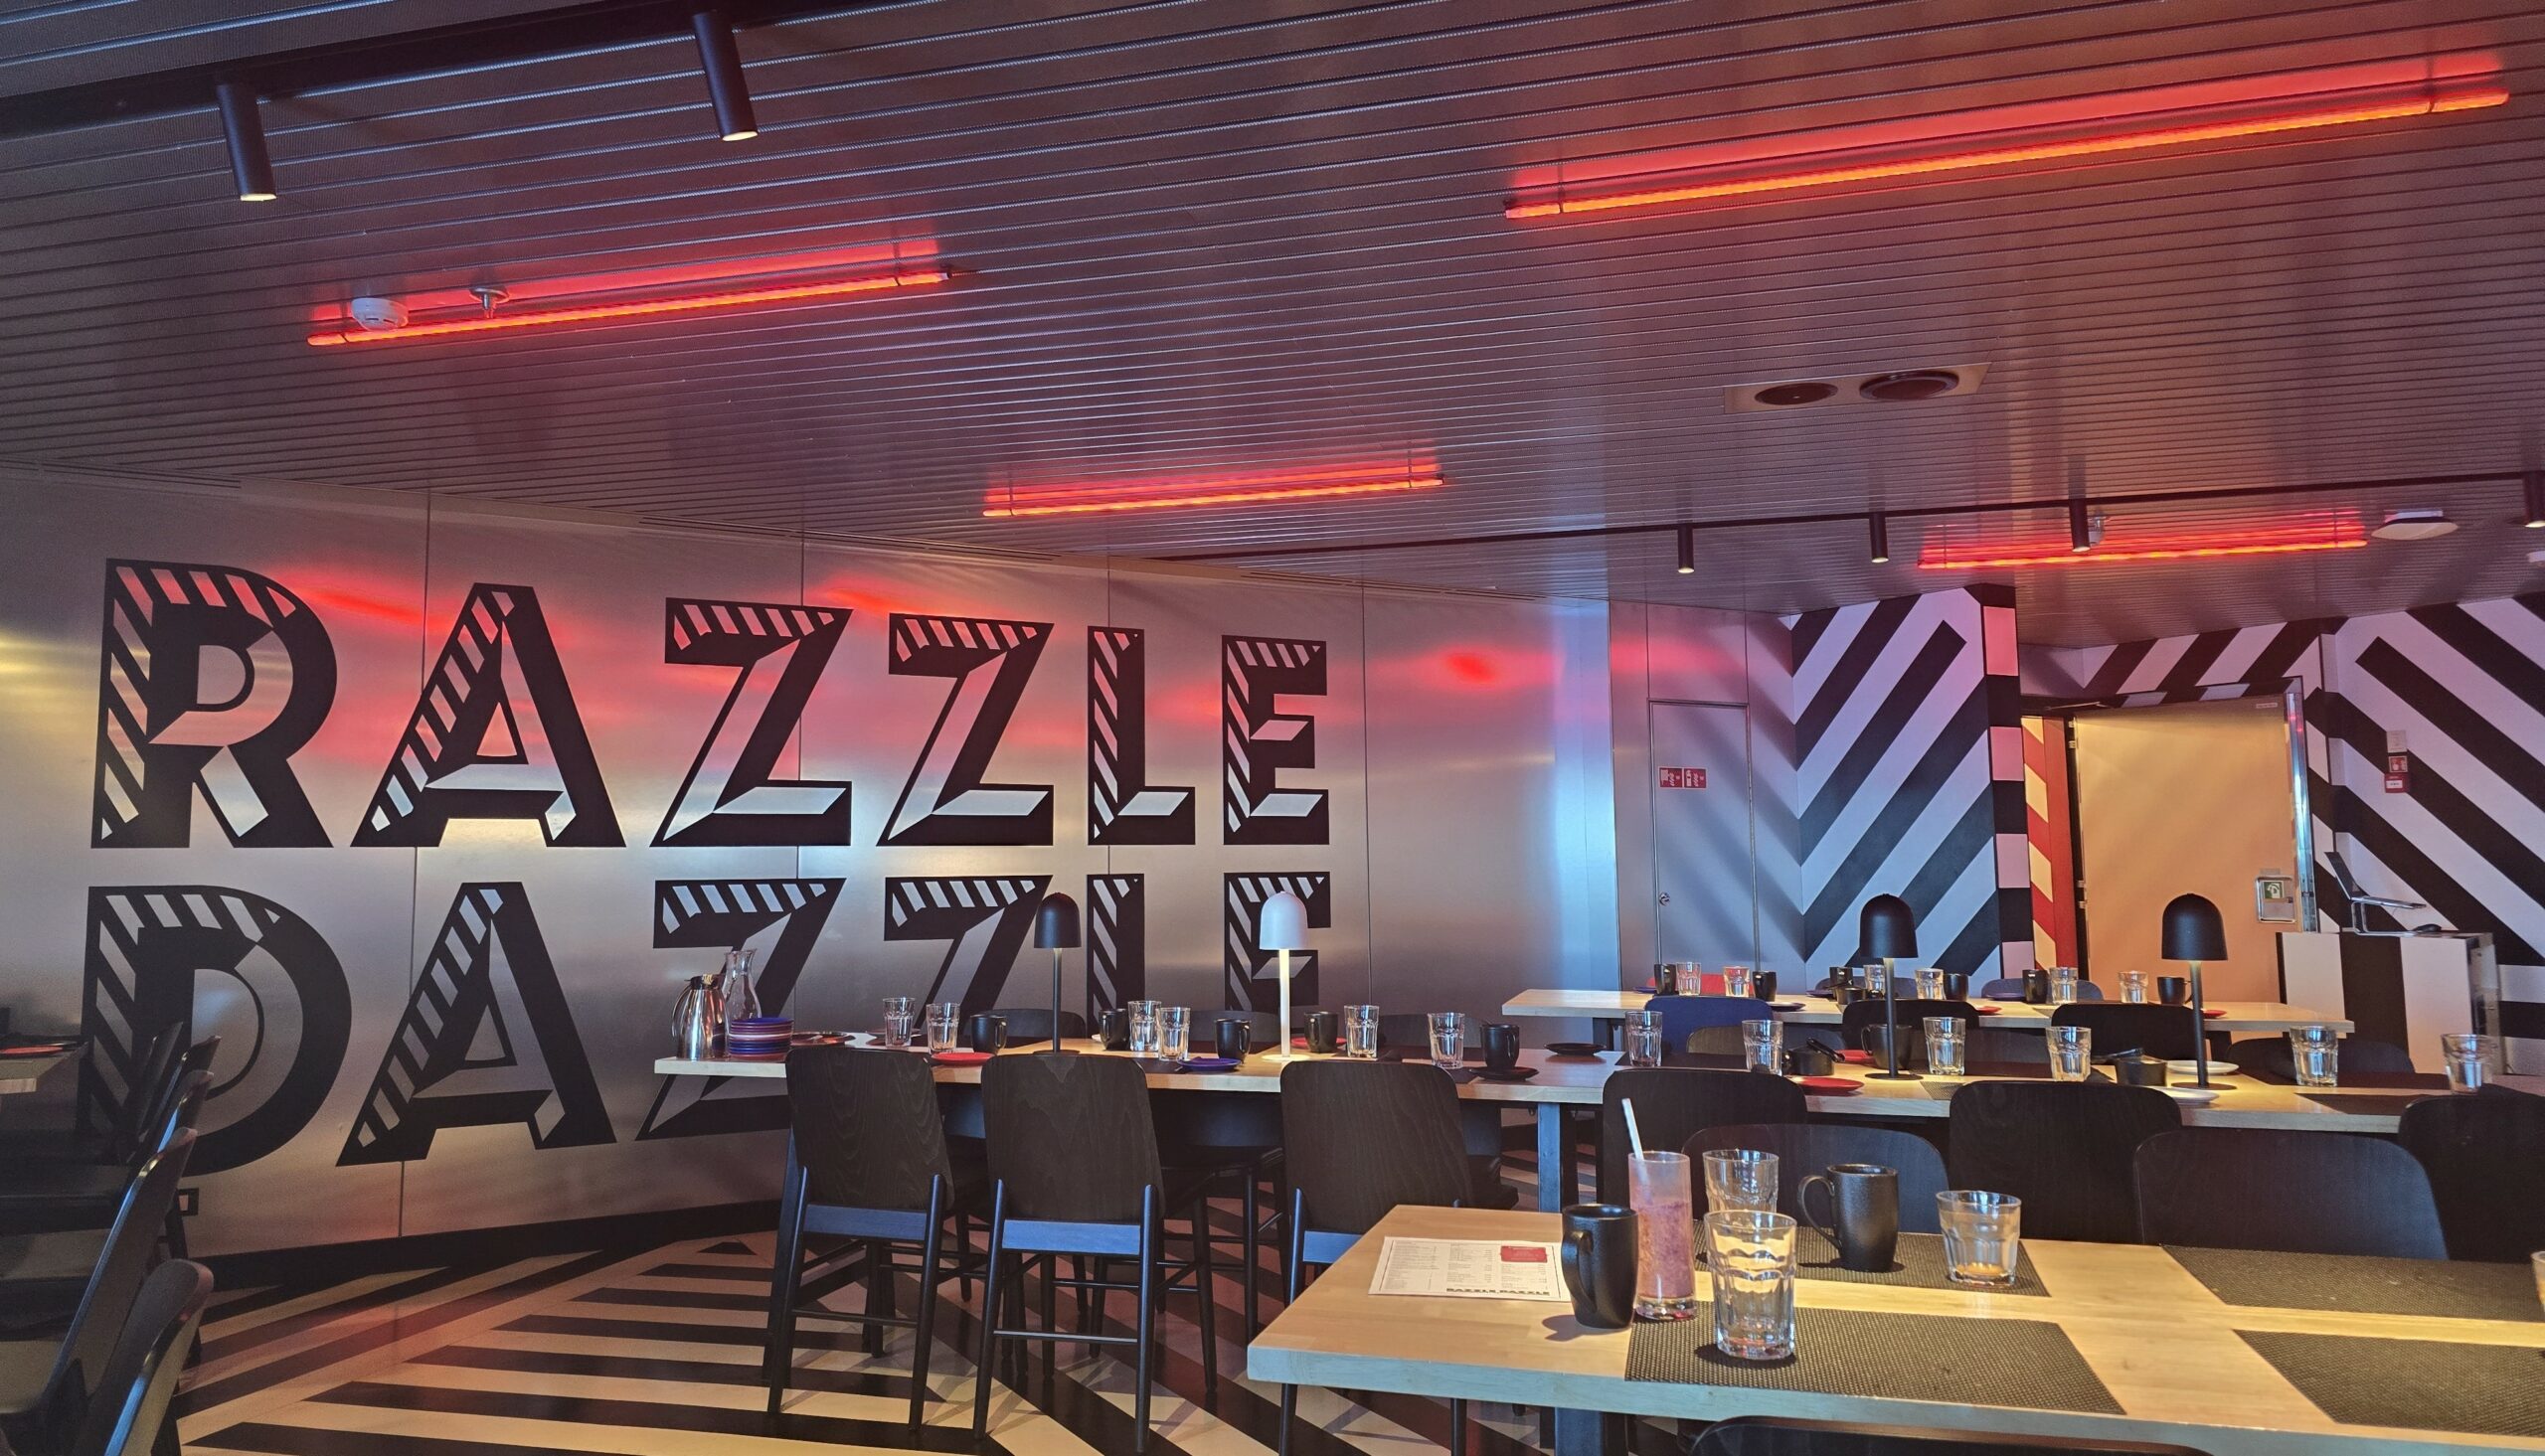 Razzle Dazzle, one of 20 eateries on Scarlet Lady, has a contemporary look and feel; friendly service; and tasty cuisine. Photo by Susan J. Young. 